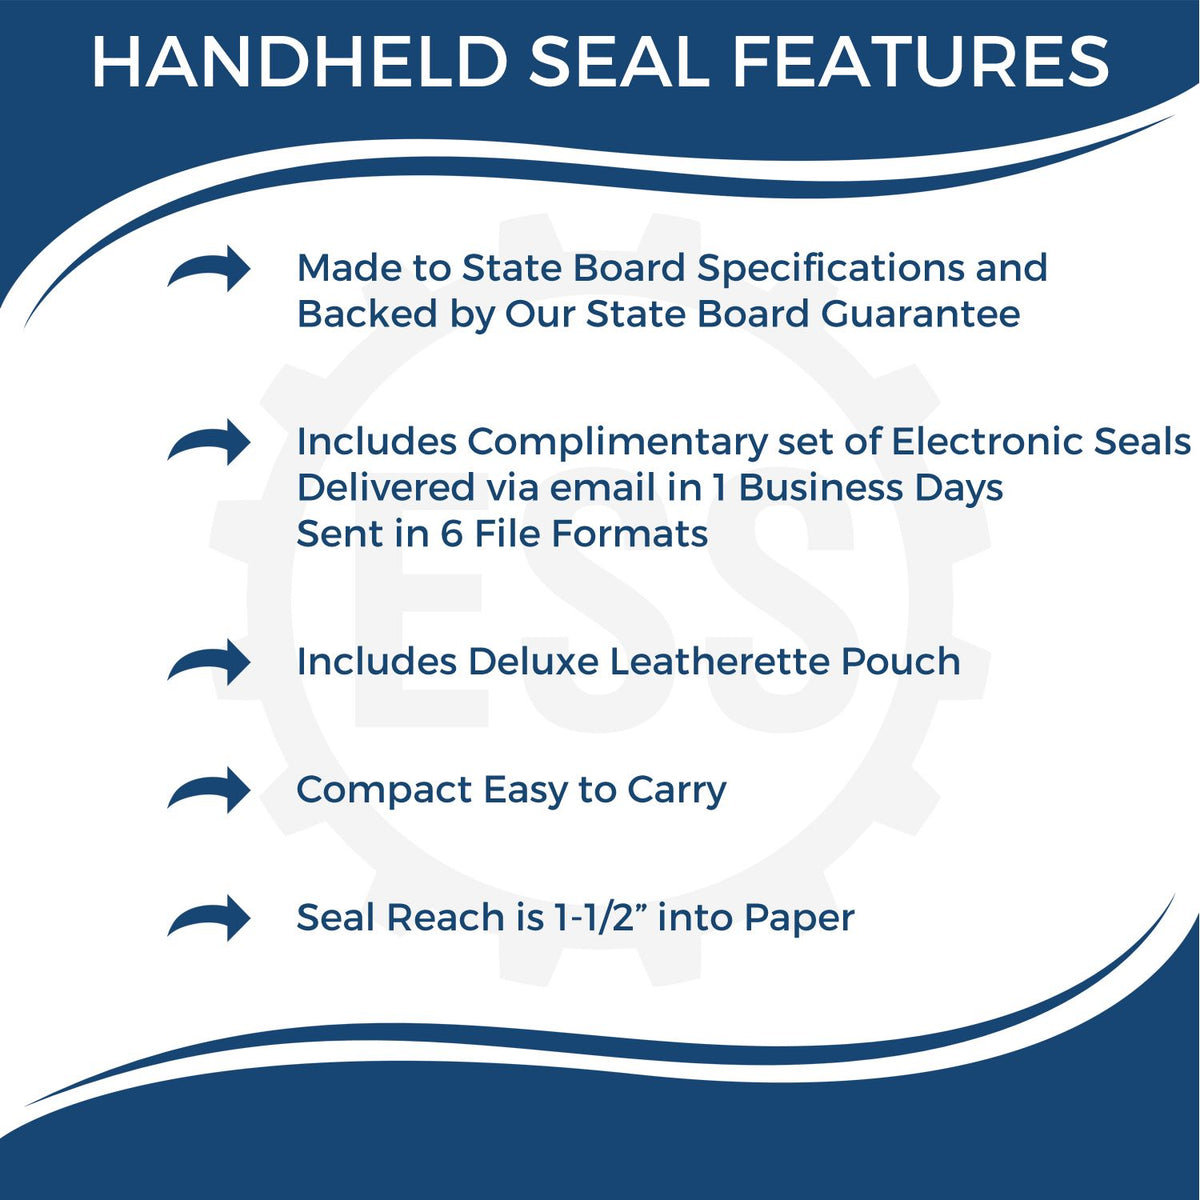 A picture of an infographic highlighting the selling points for the Handheld Kentucky Land Surveyor Seal